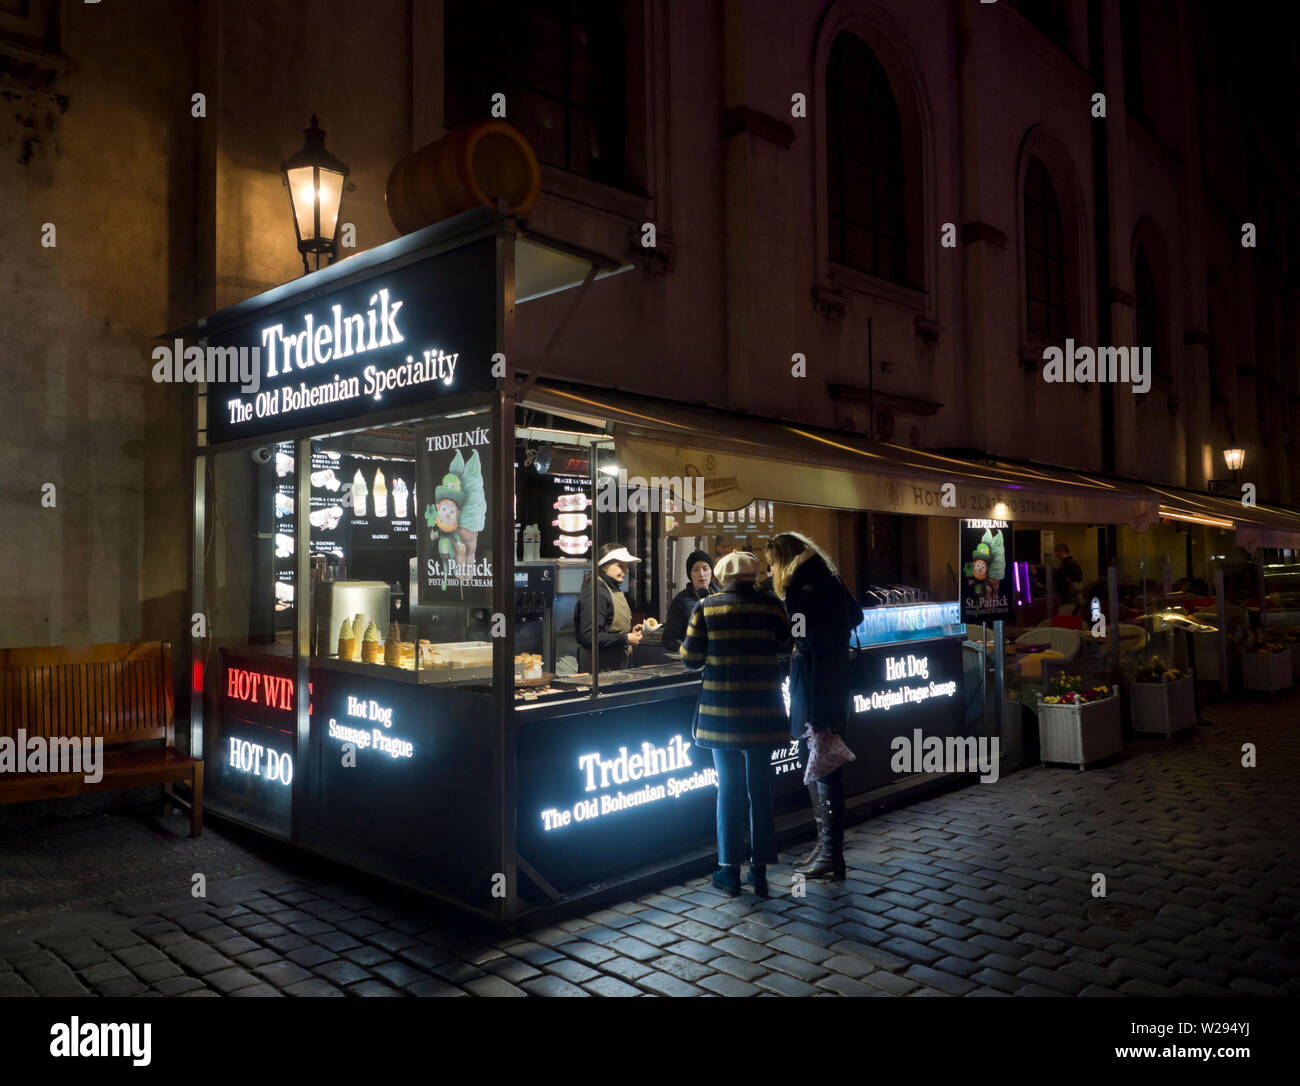 Ambulant vendor in the inner city, Stare Mesto, Prague Czech republic offering the traditional sweet pastry Tdrelnik to nighttime strollers Stock Photo